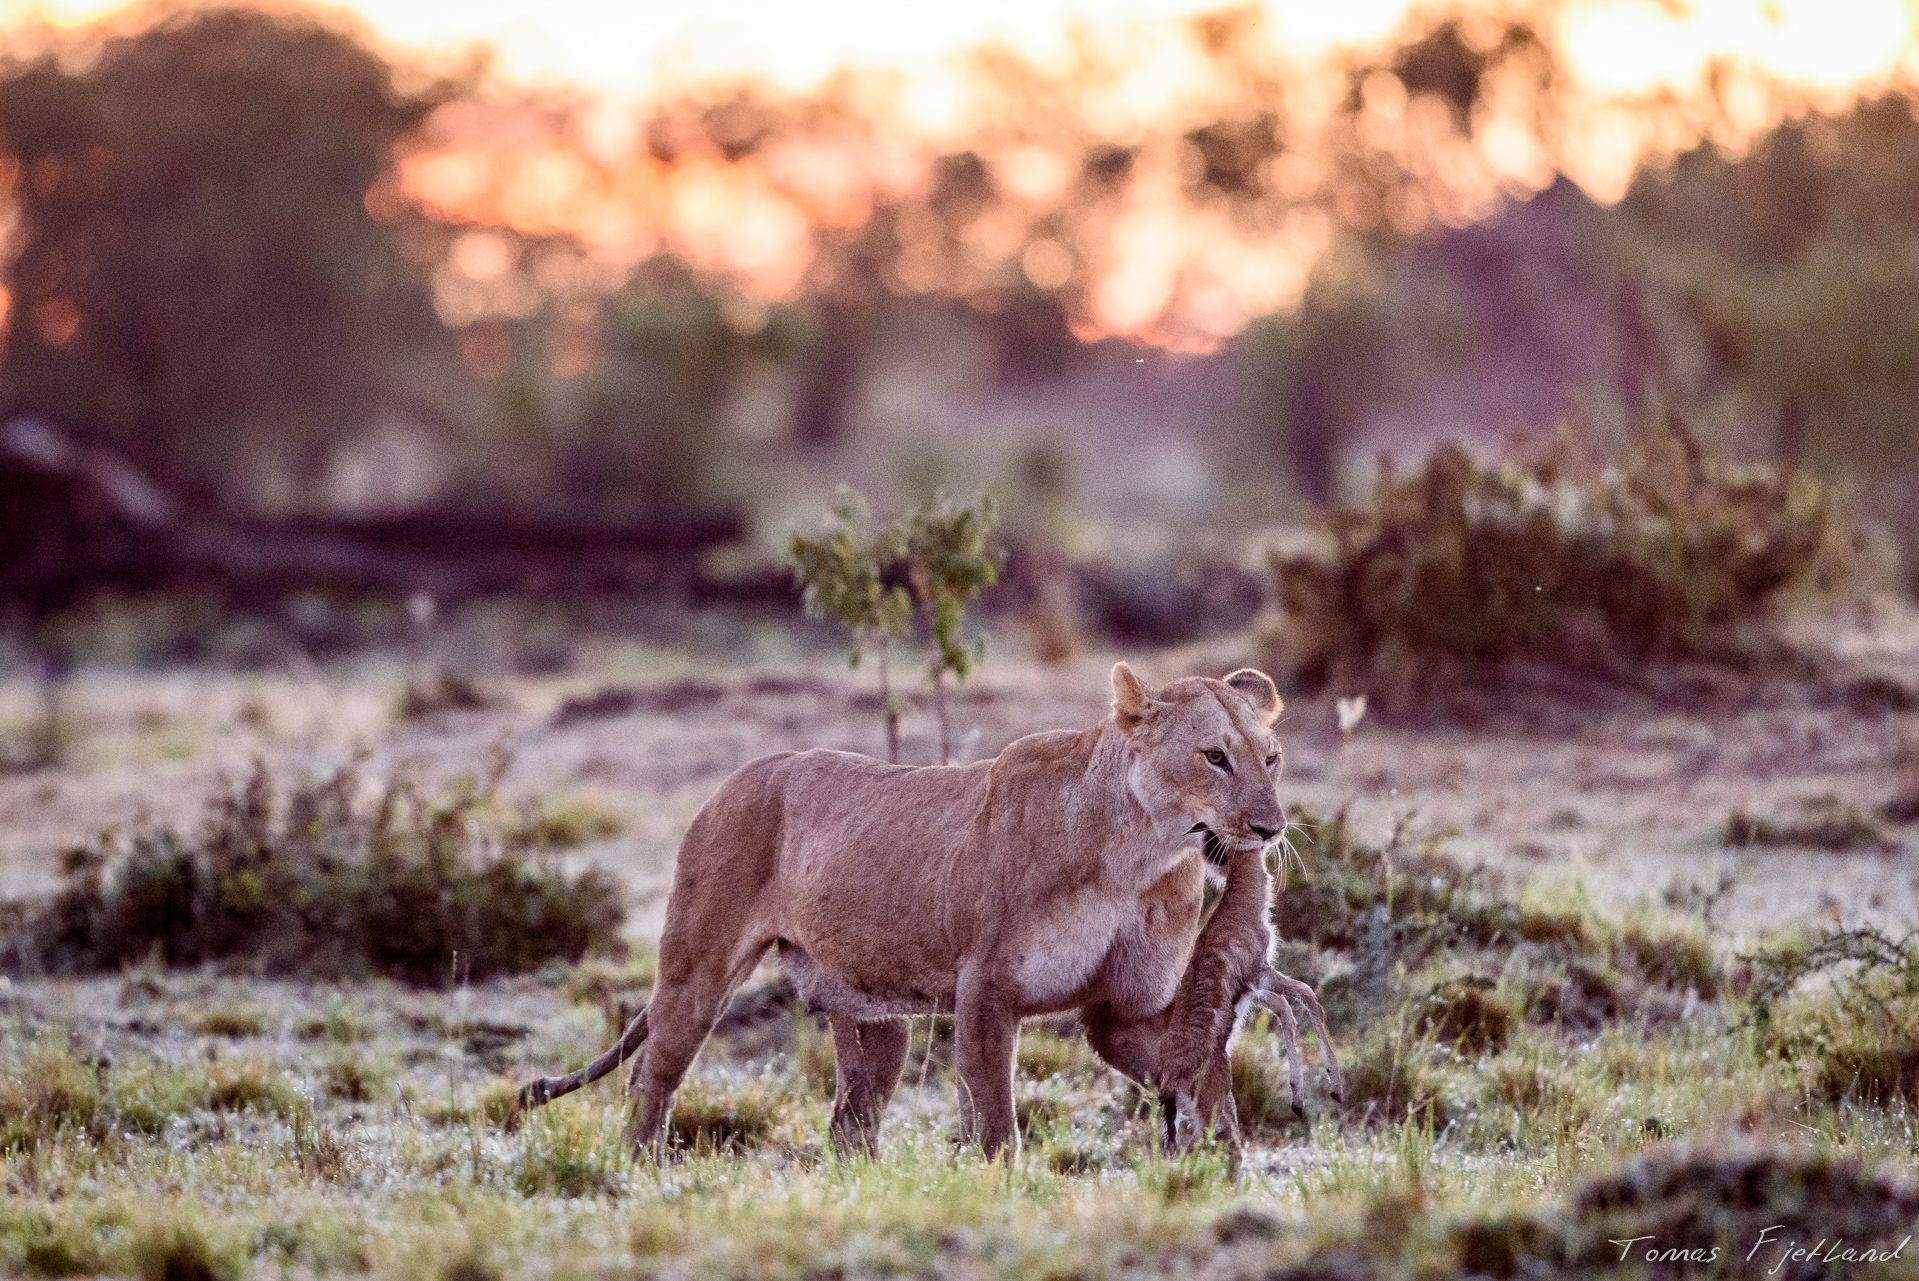 Lioness returning to her cubs with a Thomsons gazelle calf as the sun rises behind her